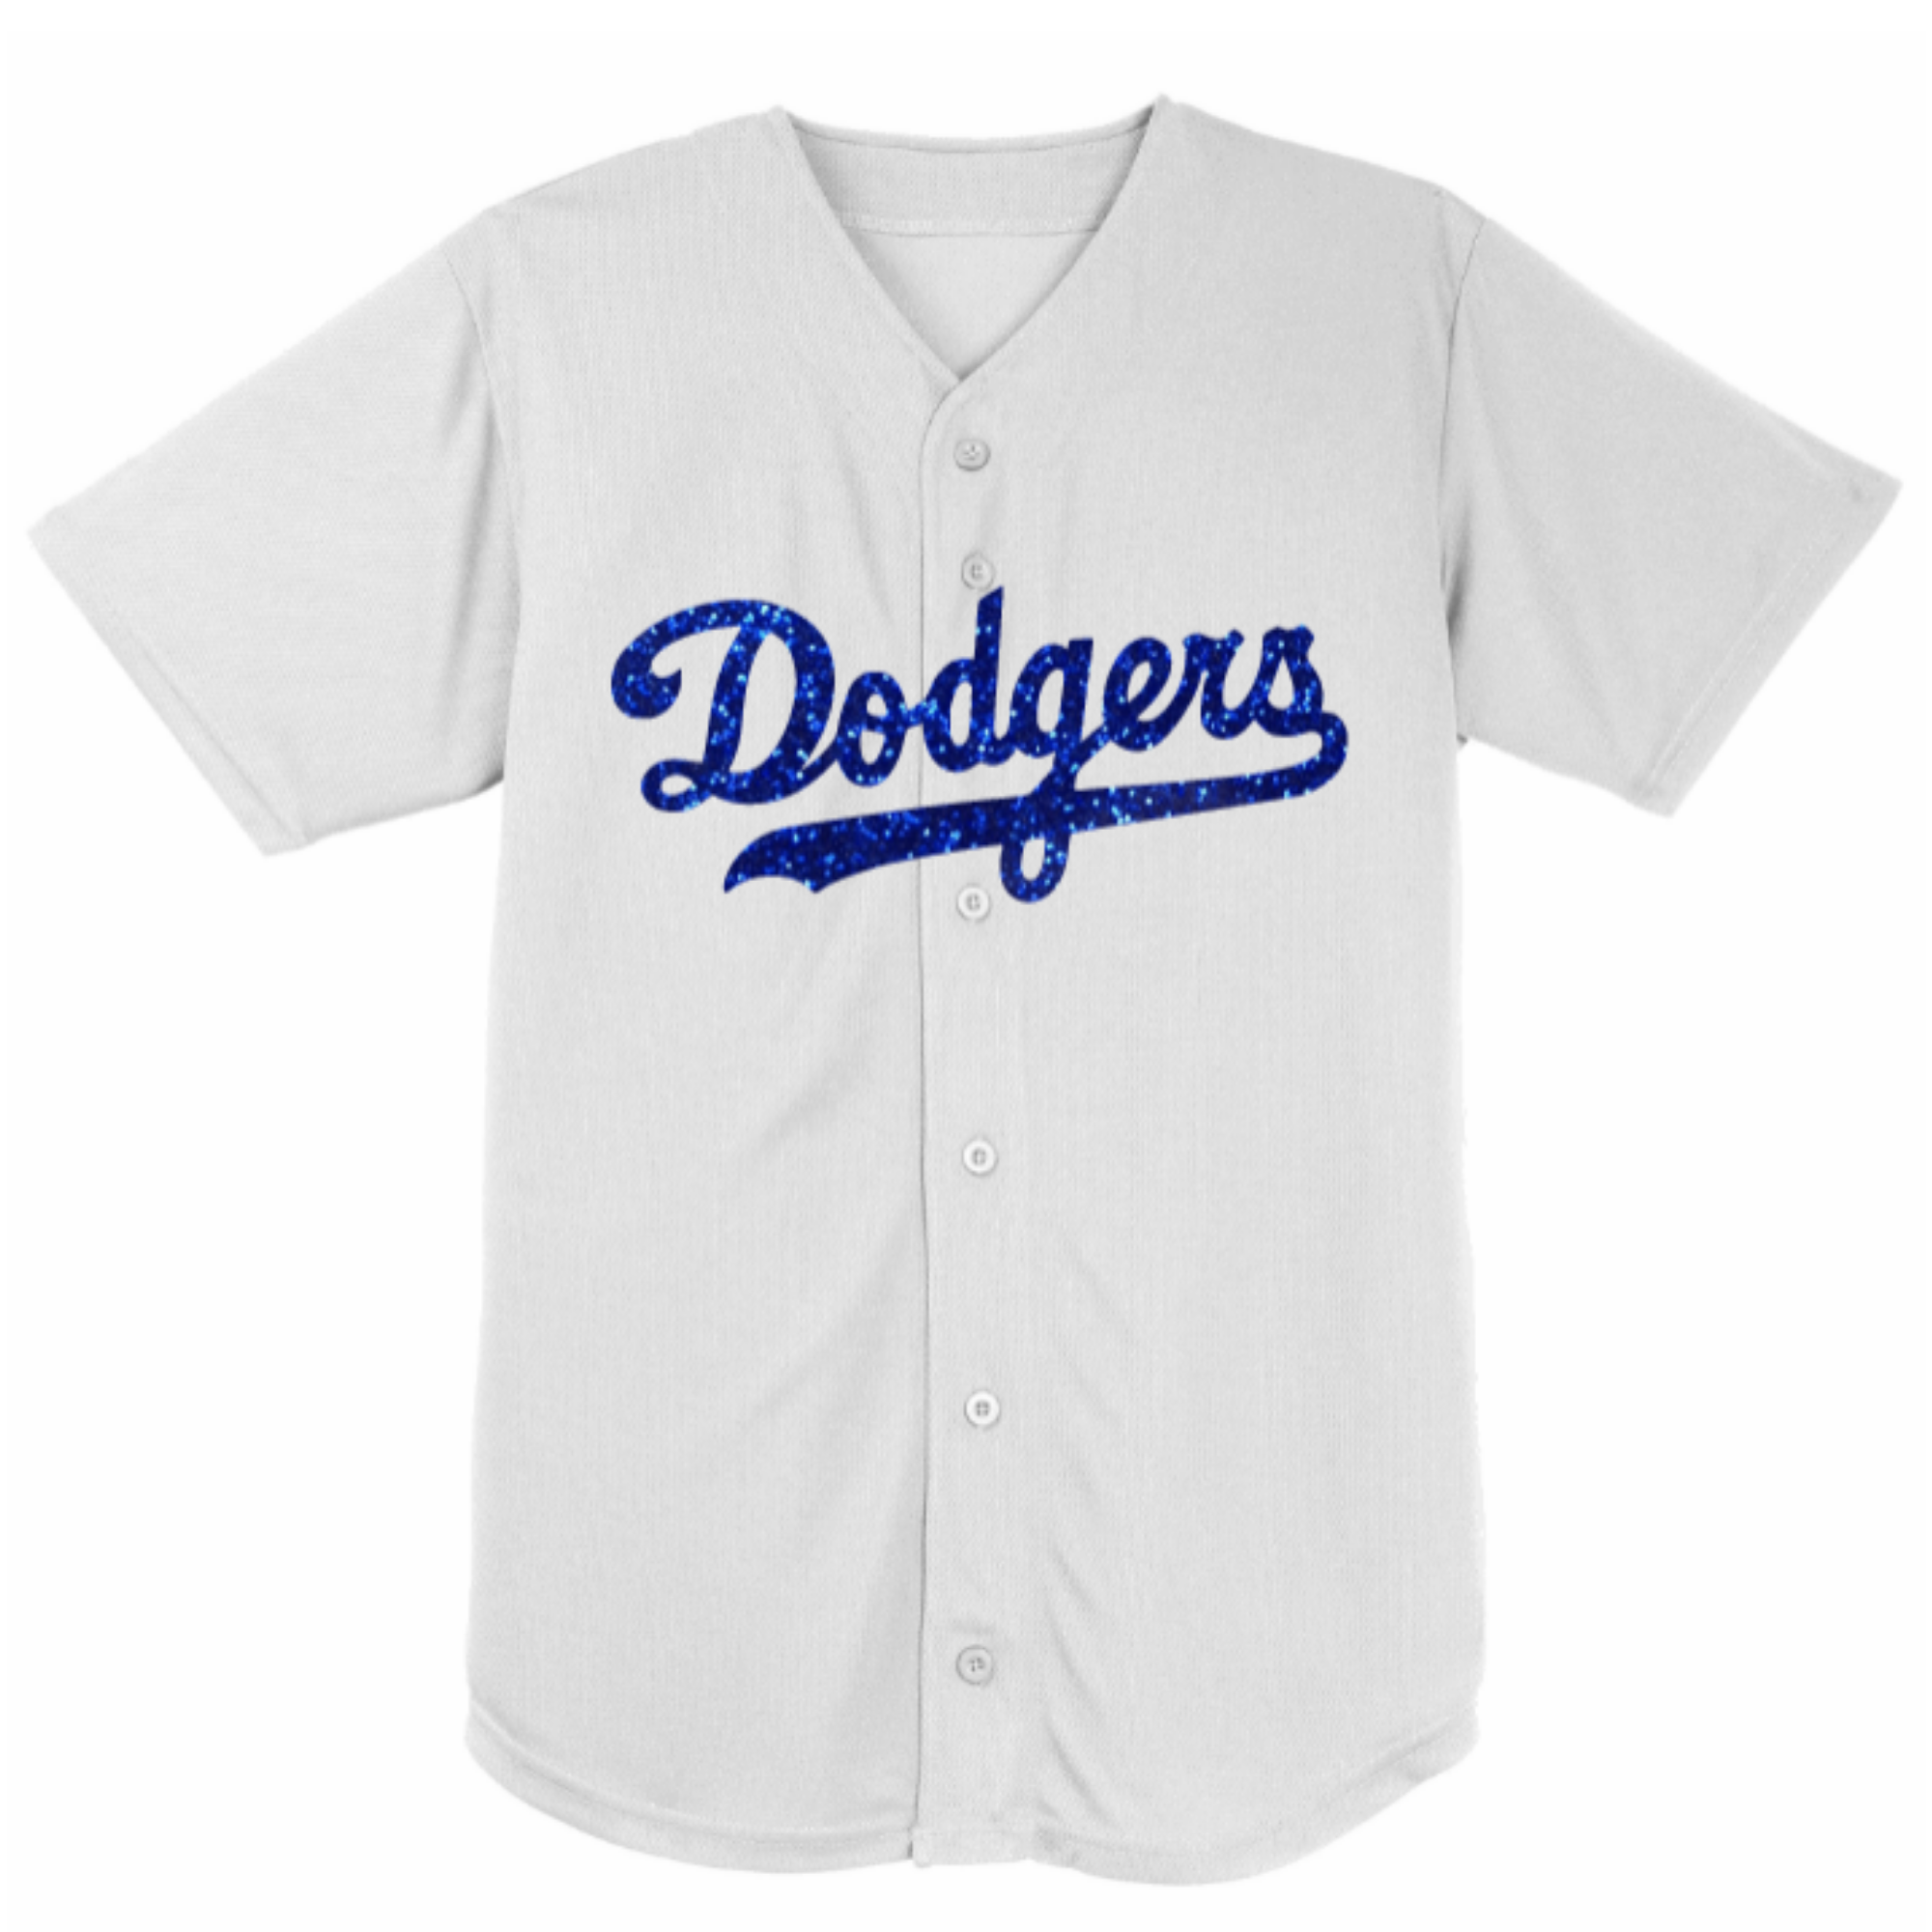 la dodgers mlb jersey differences